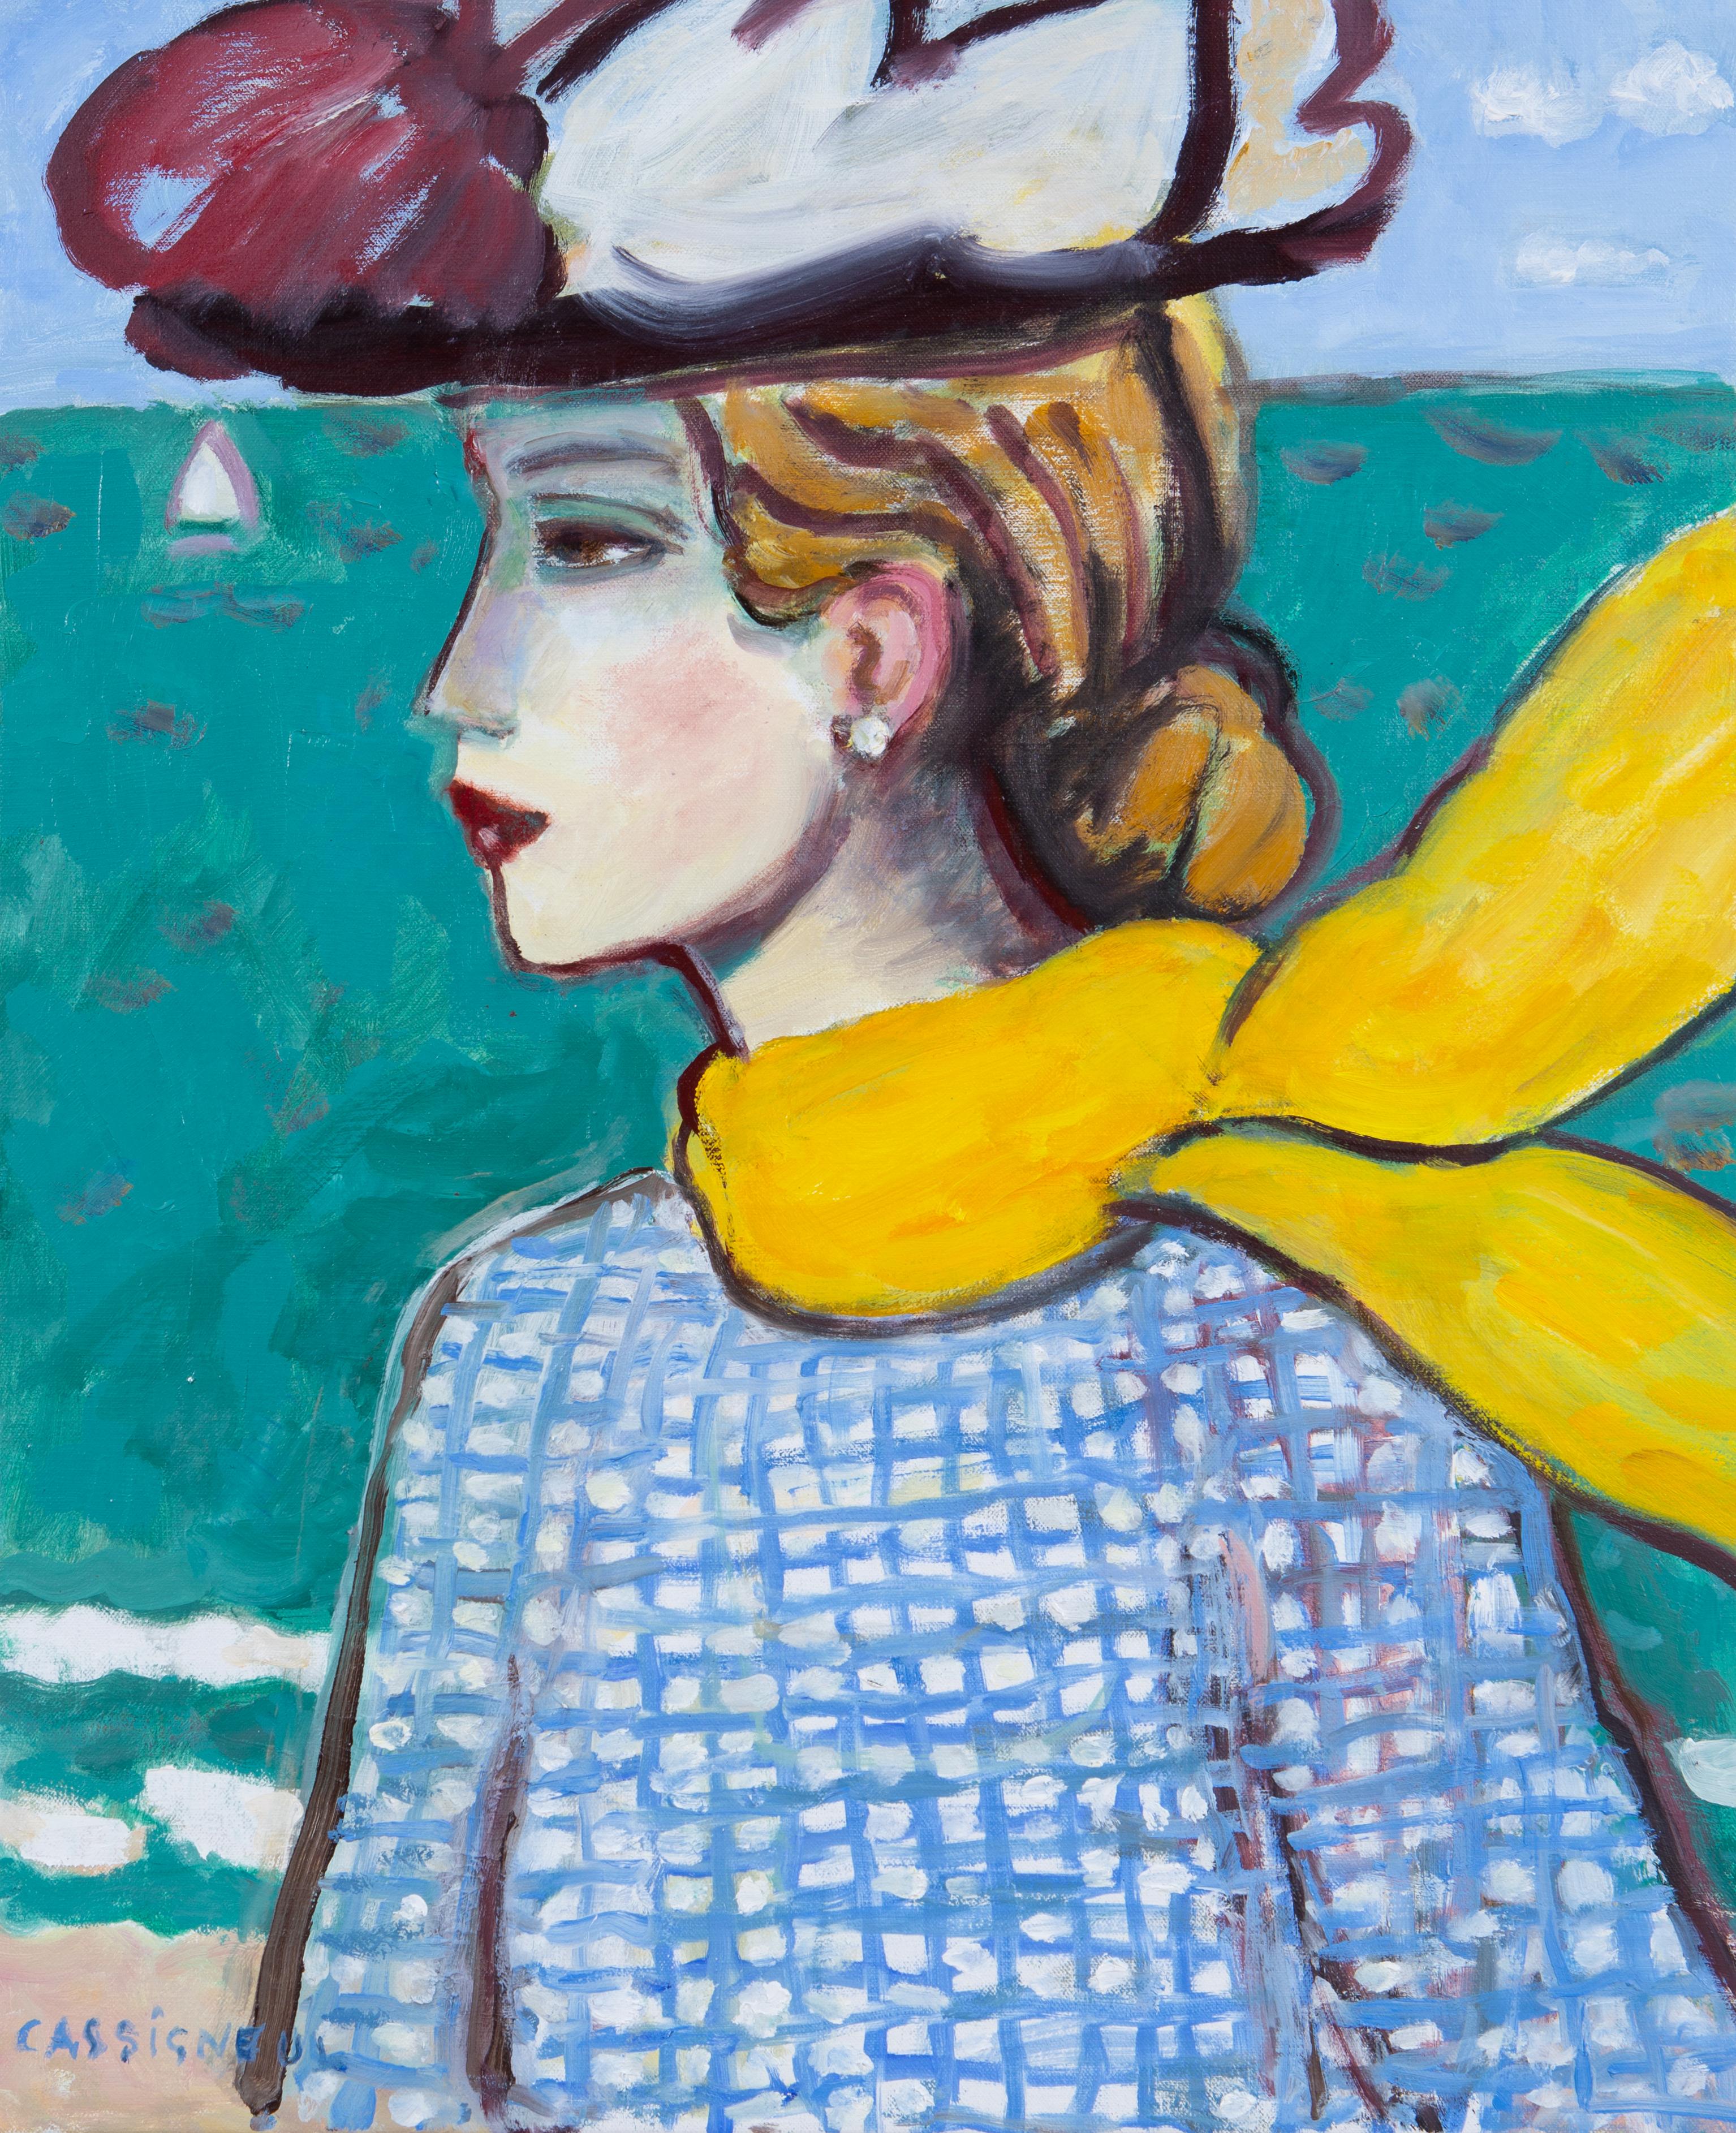 Woman with Yellow Scarf    ( L'echarpe jaune) - Expressionist Painting by Jean-Pierre Cassigneul